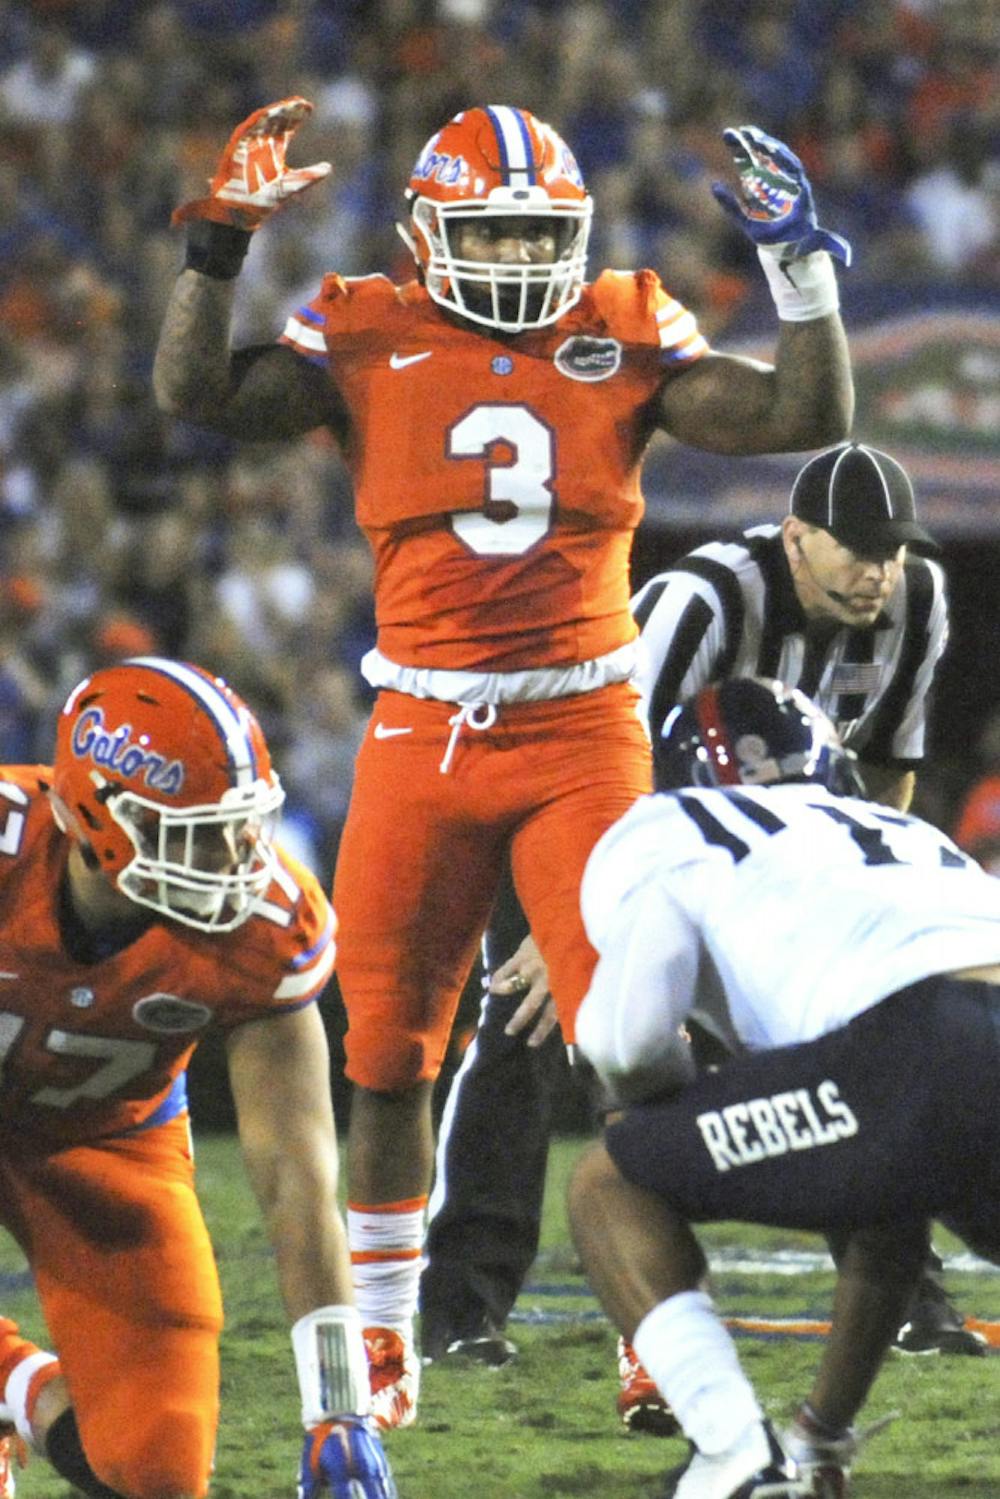 <p>Linebacker Antonio Morrison pumps up the crowd during Florida's 38-10 win against Ole Miss on Oct. 3, 2015, at Ben Hill Griffin Stadium.</p>